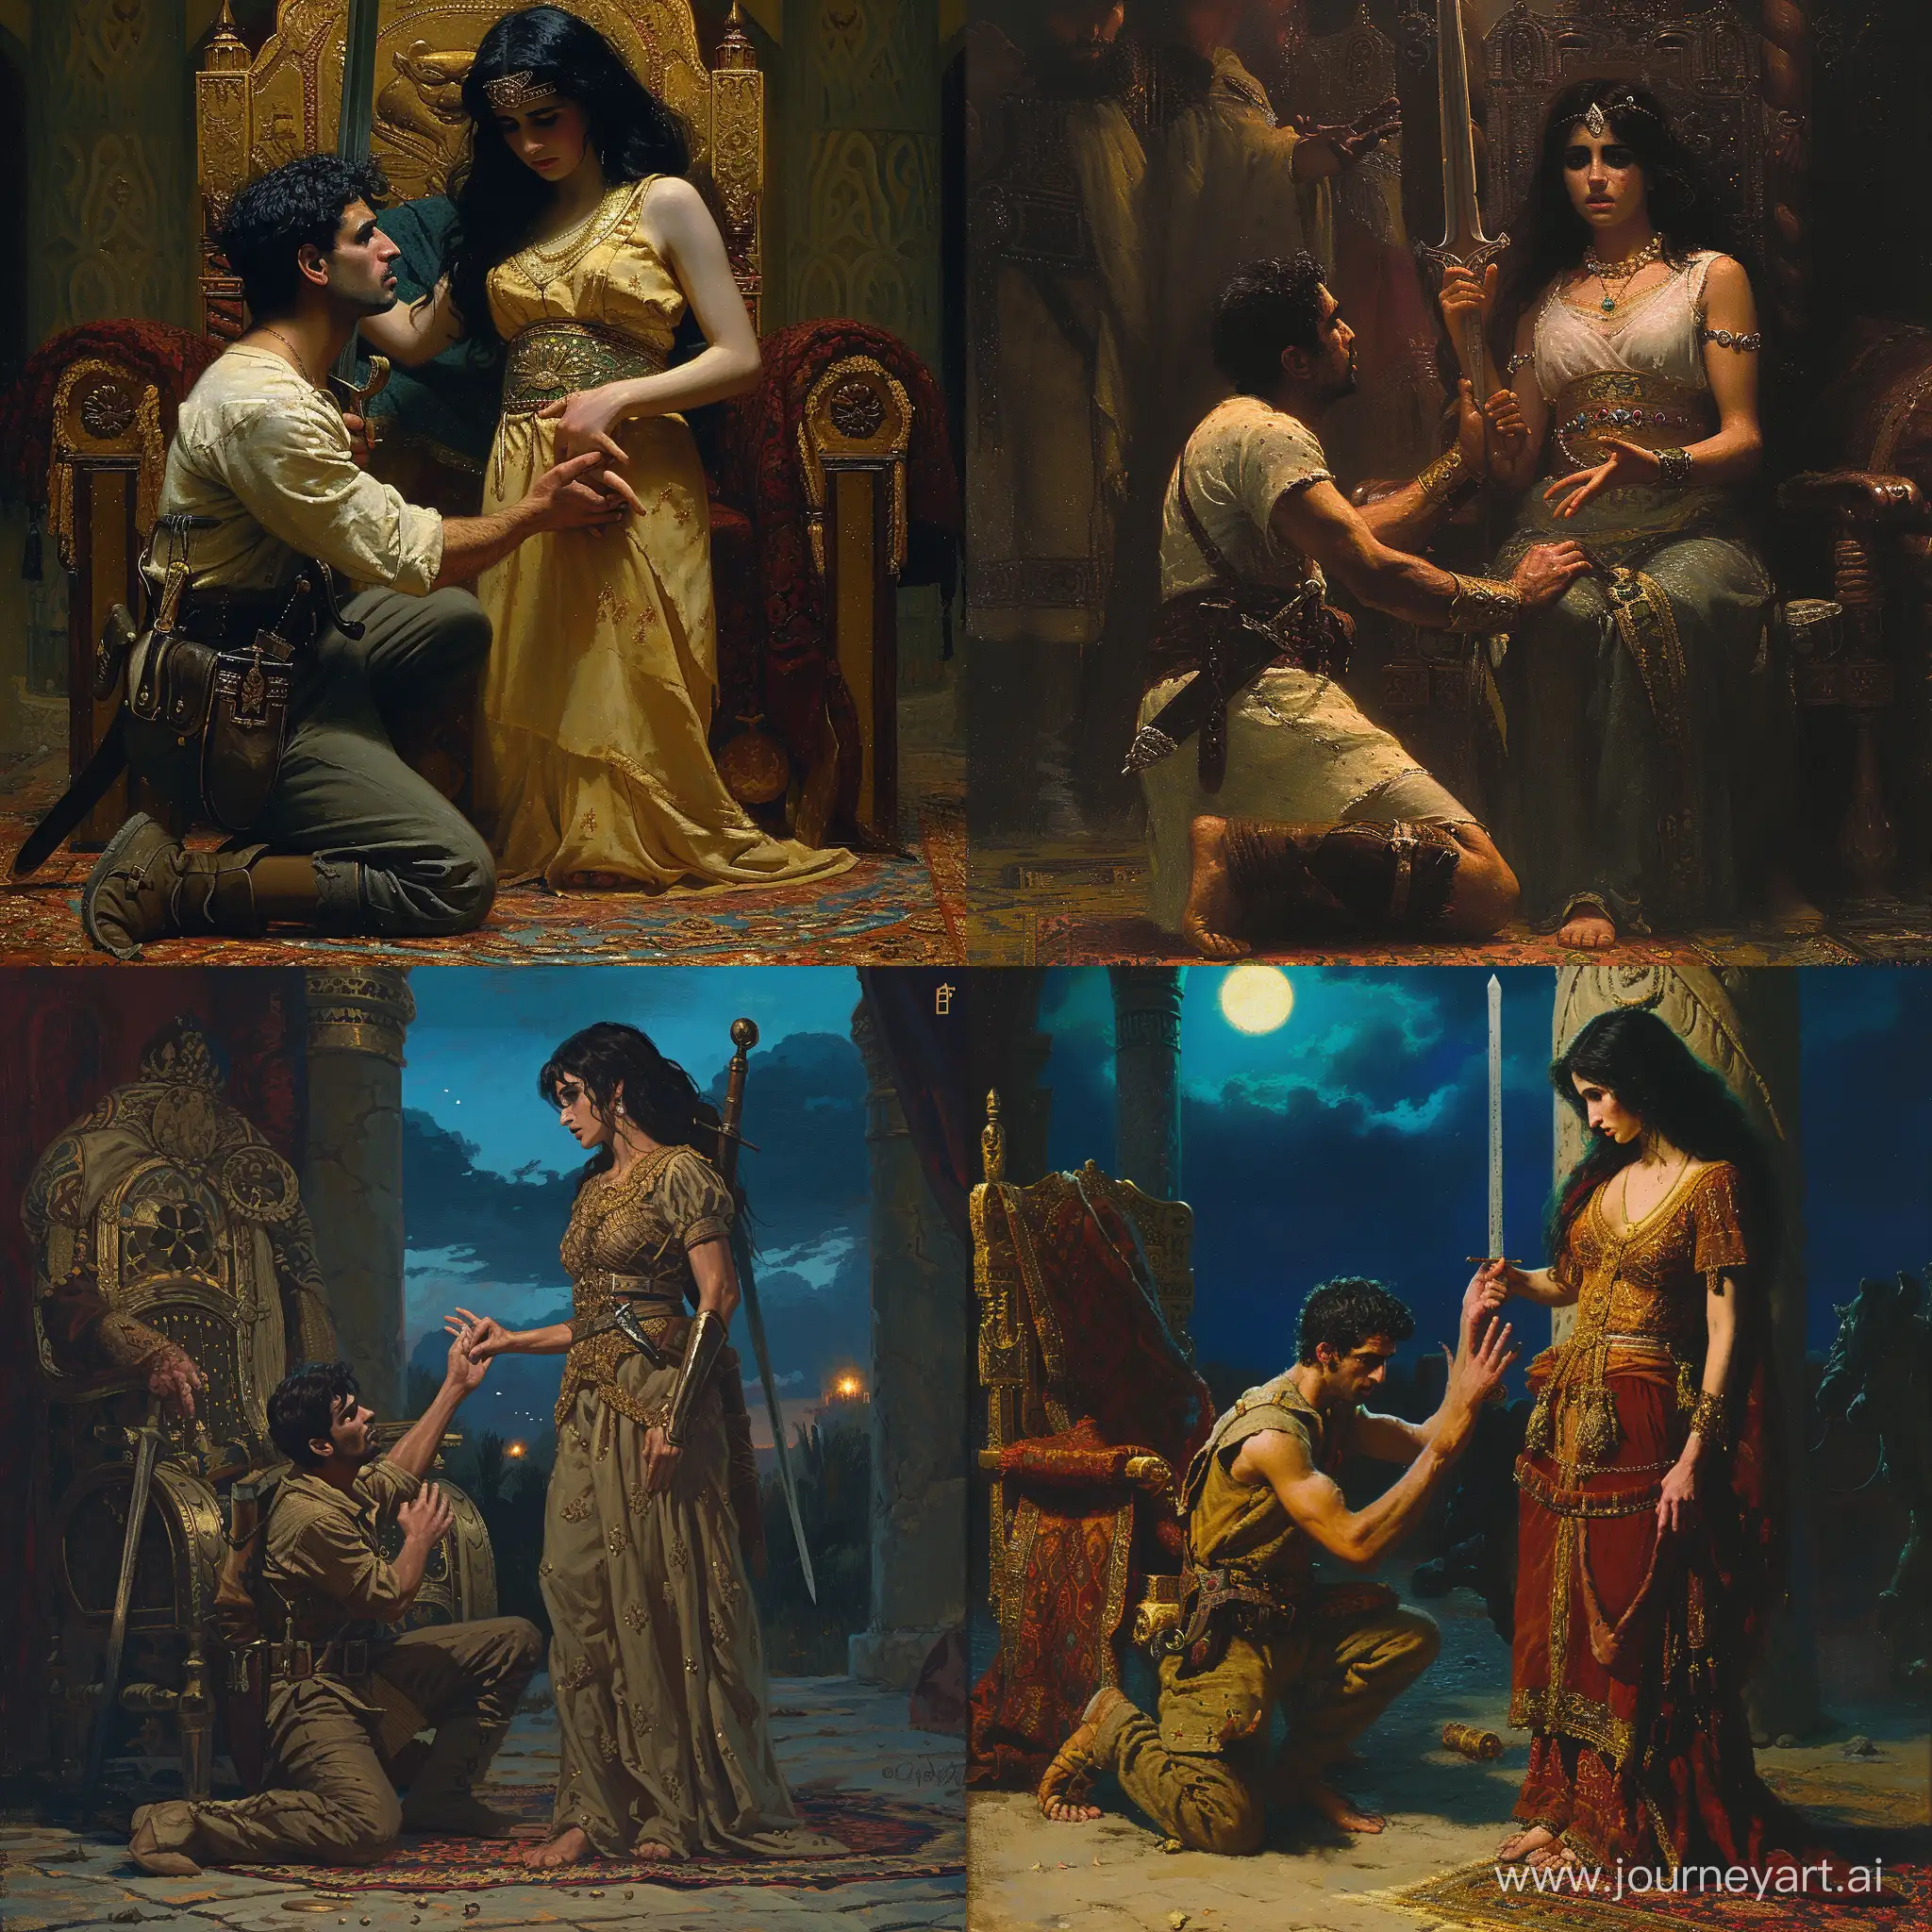 Persian-Princess-Confronts-Kneeling-Arab-Soldier-with-Sword-at-Night